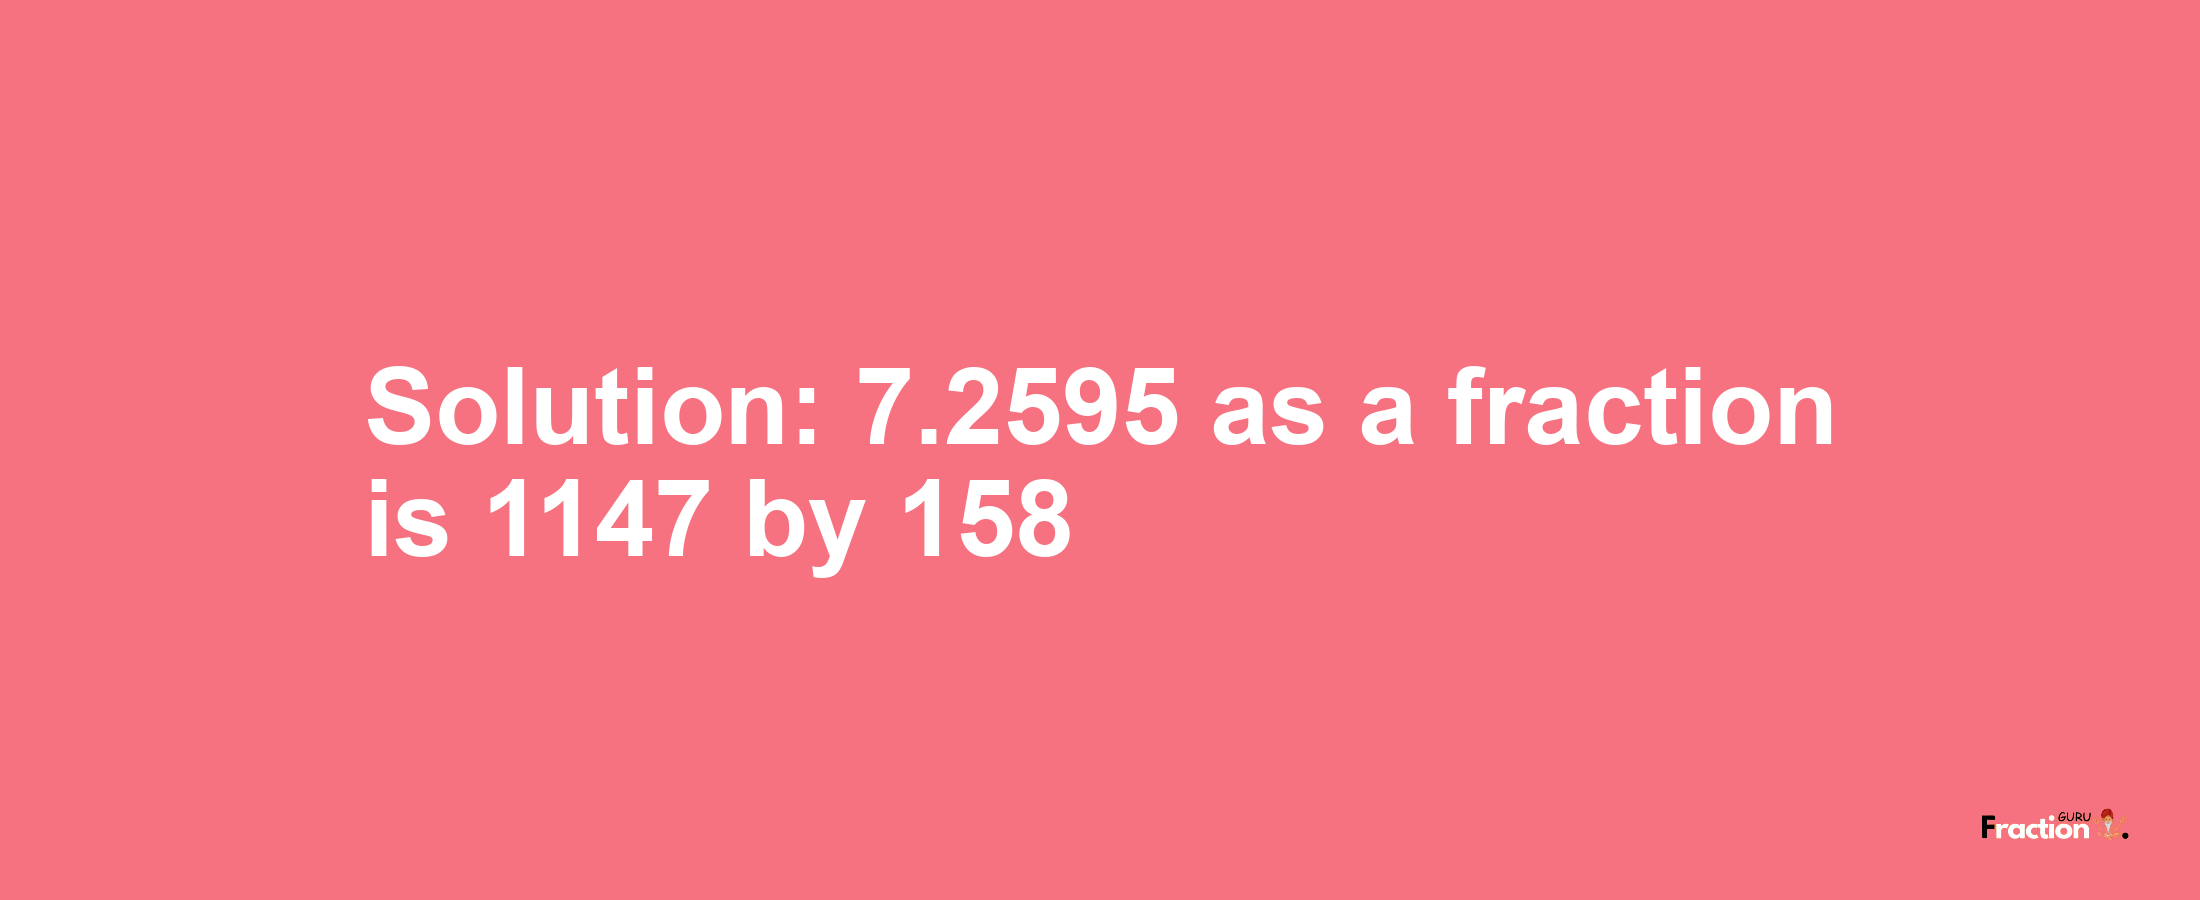 Solution:7.2595 as a fraction is 1147/158